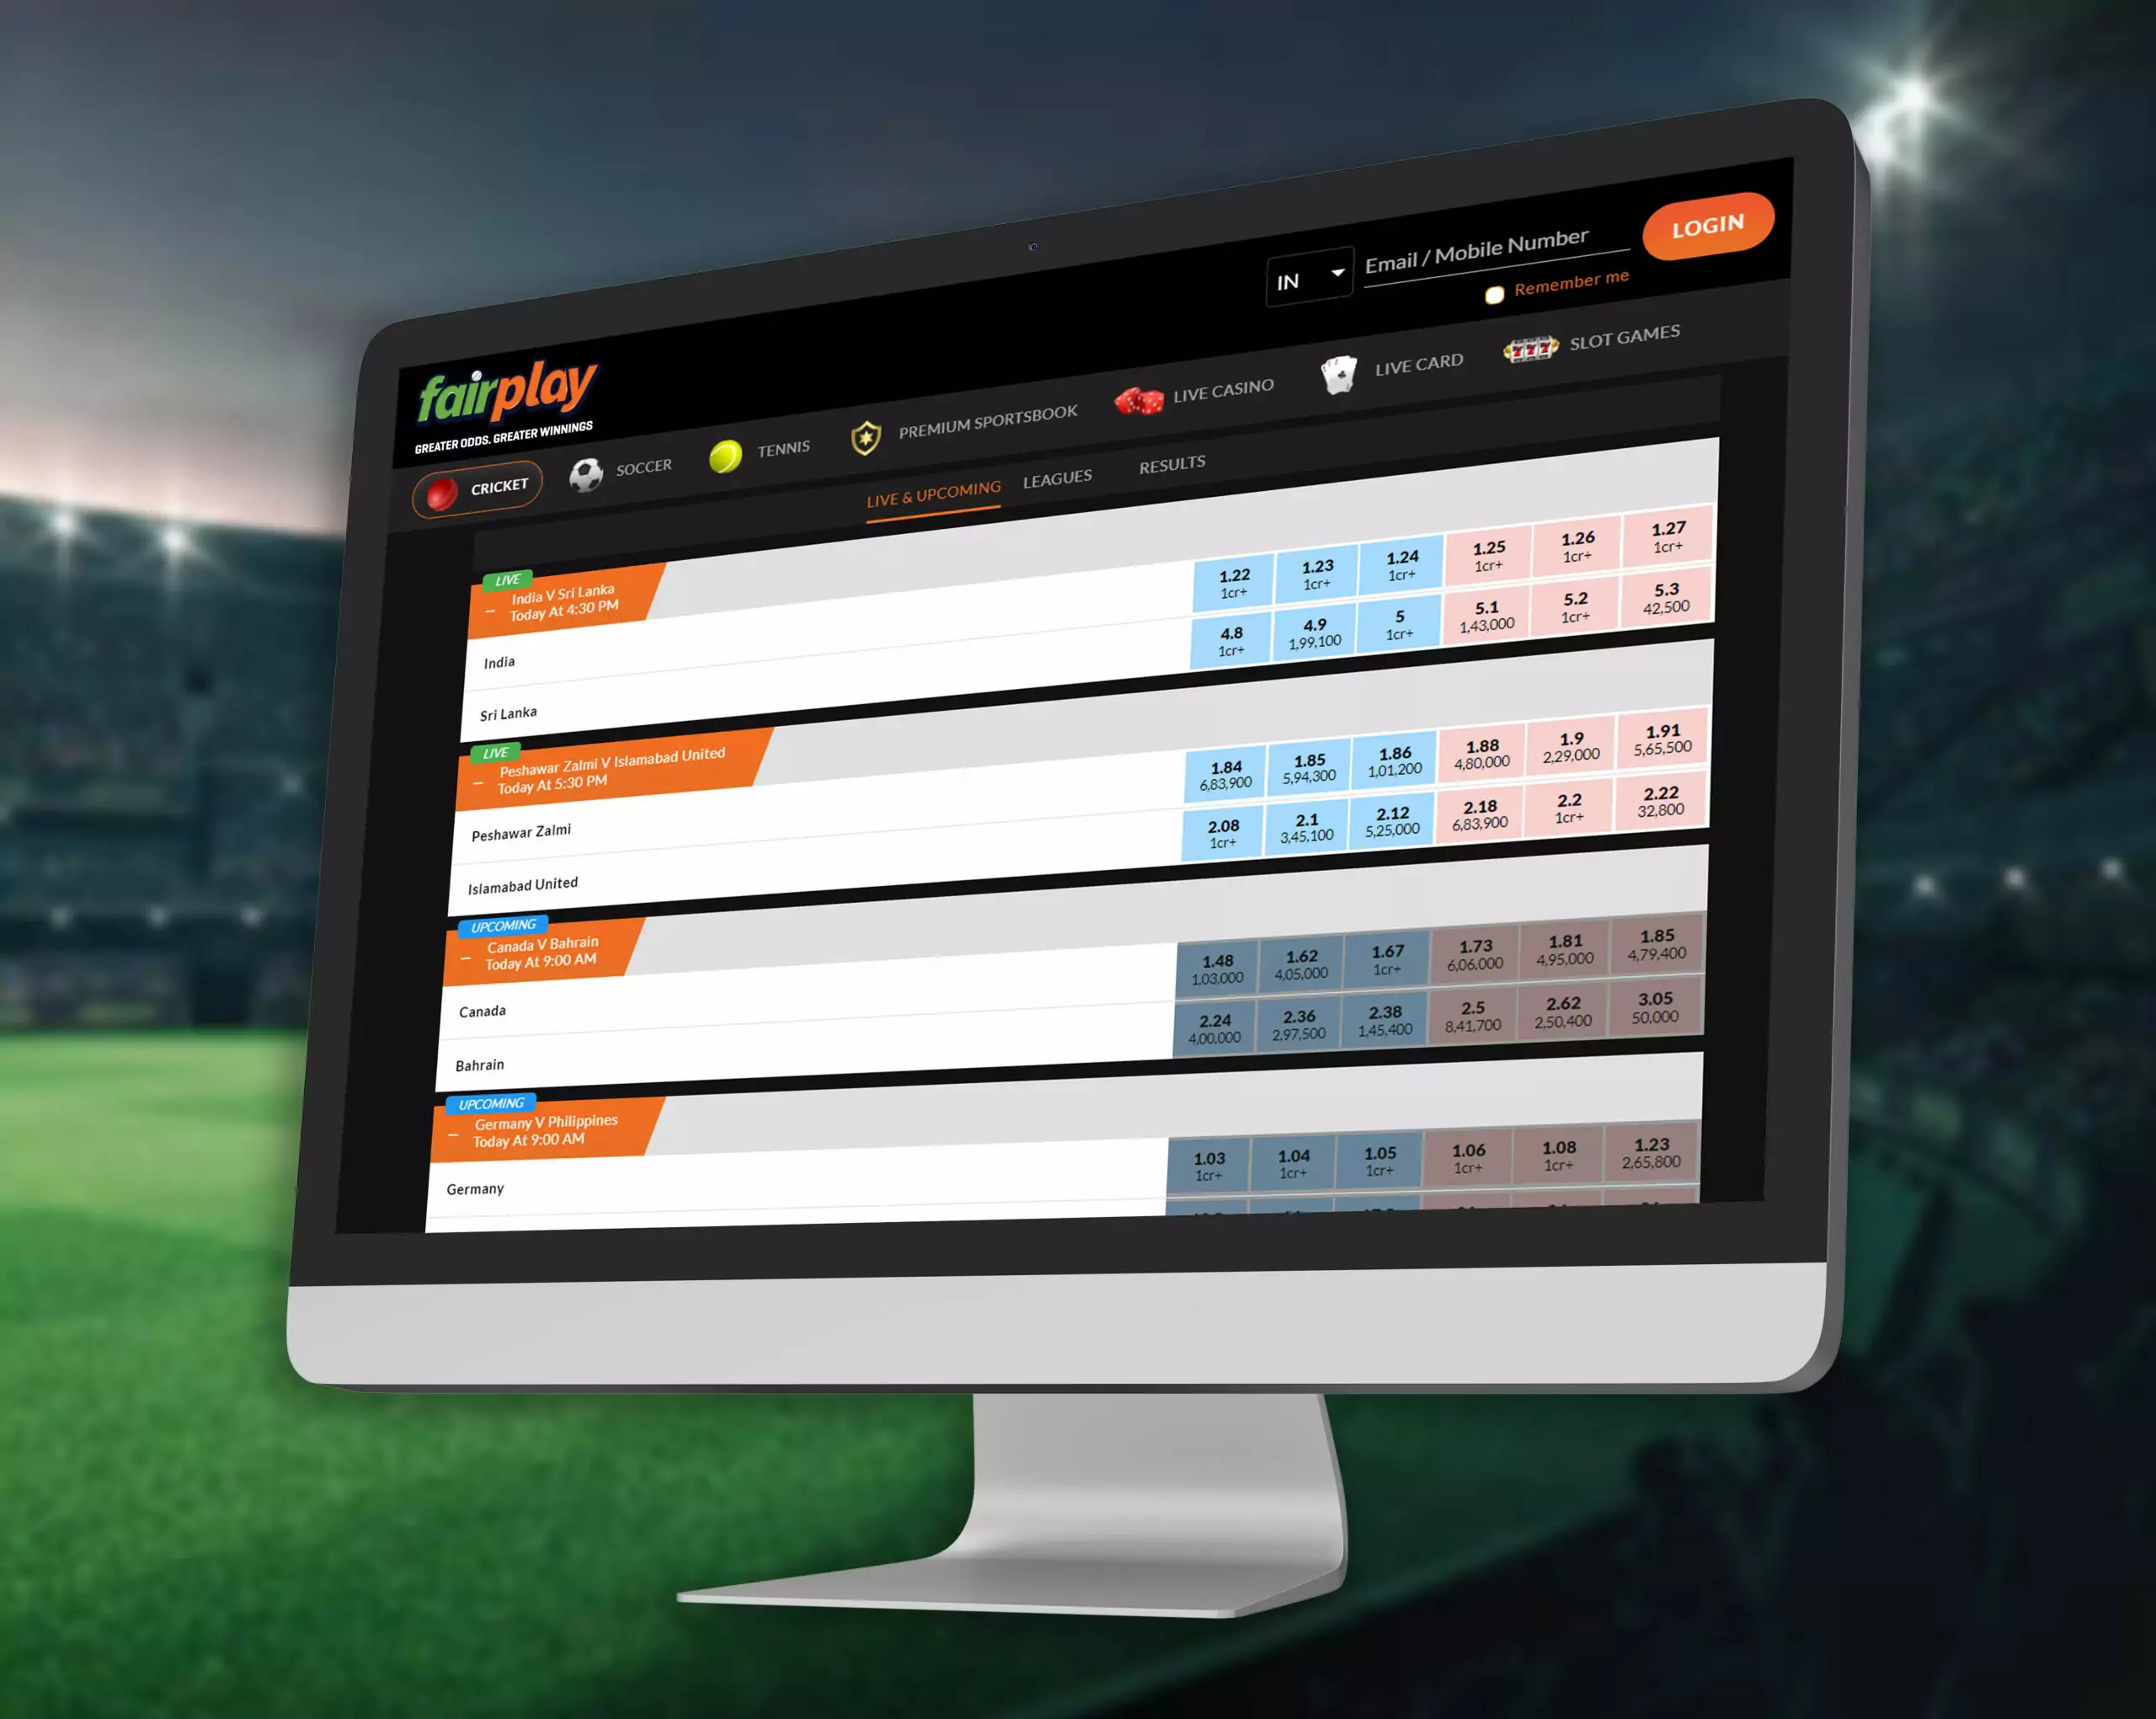 Fairplay offers bets on popular cricket matches and competitions.